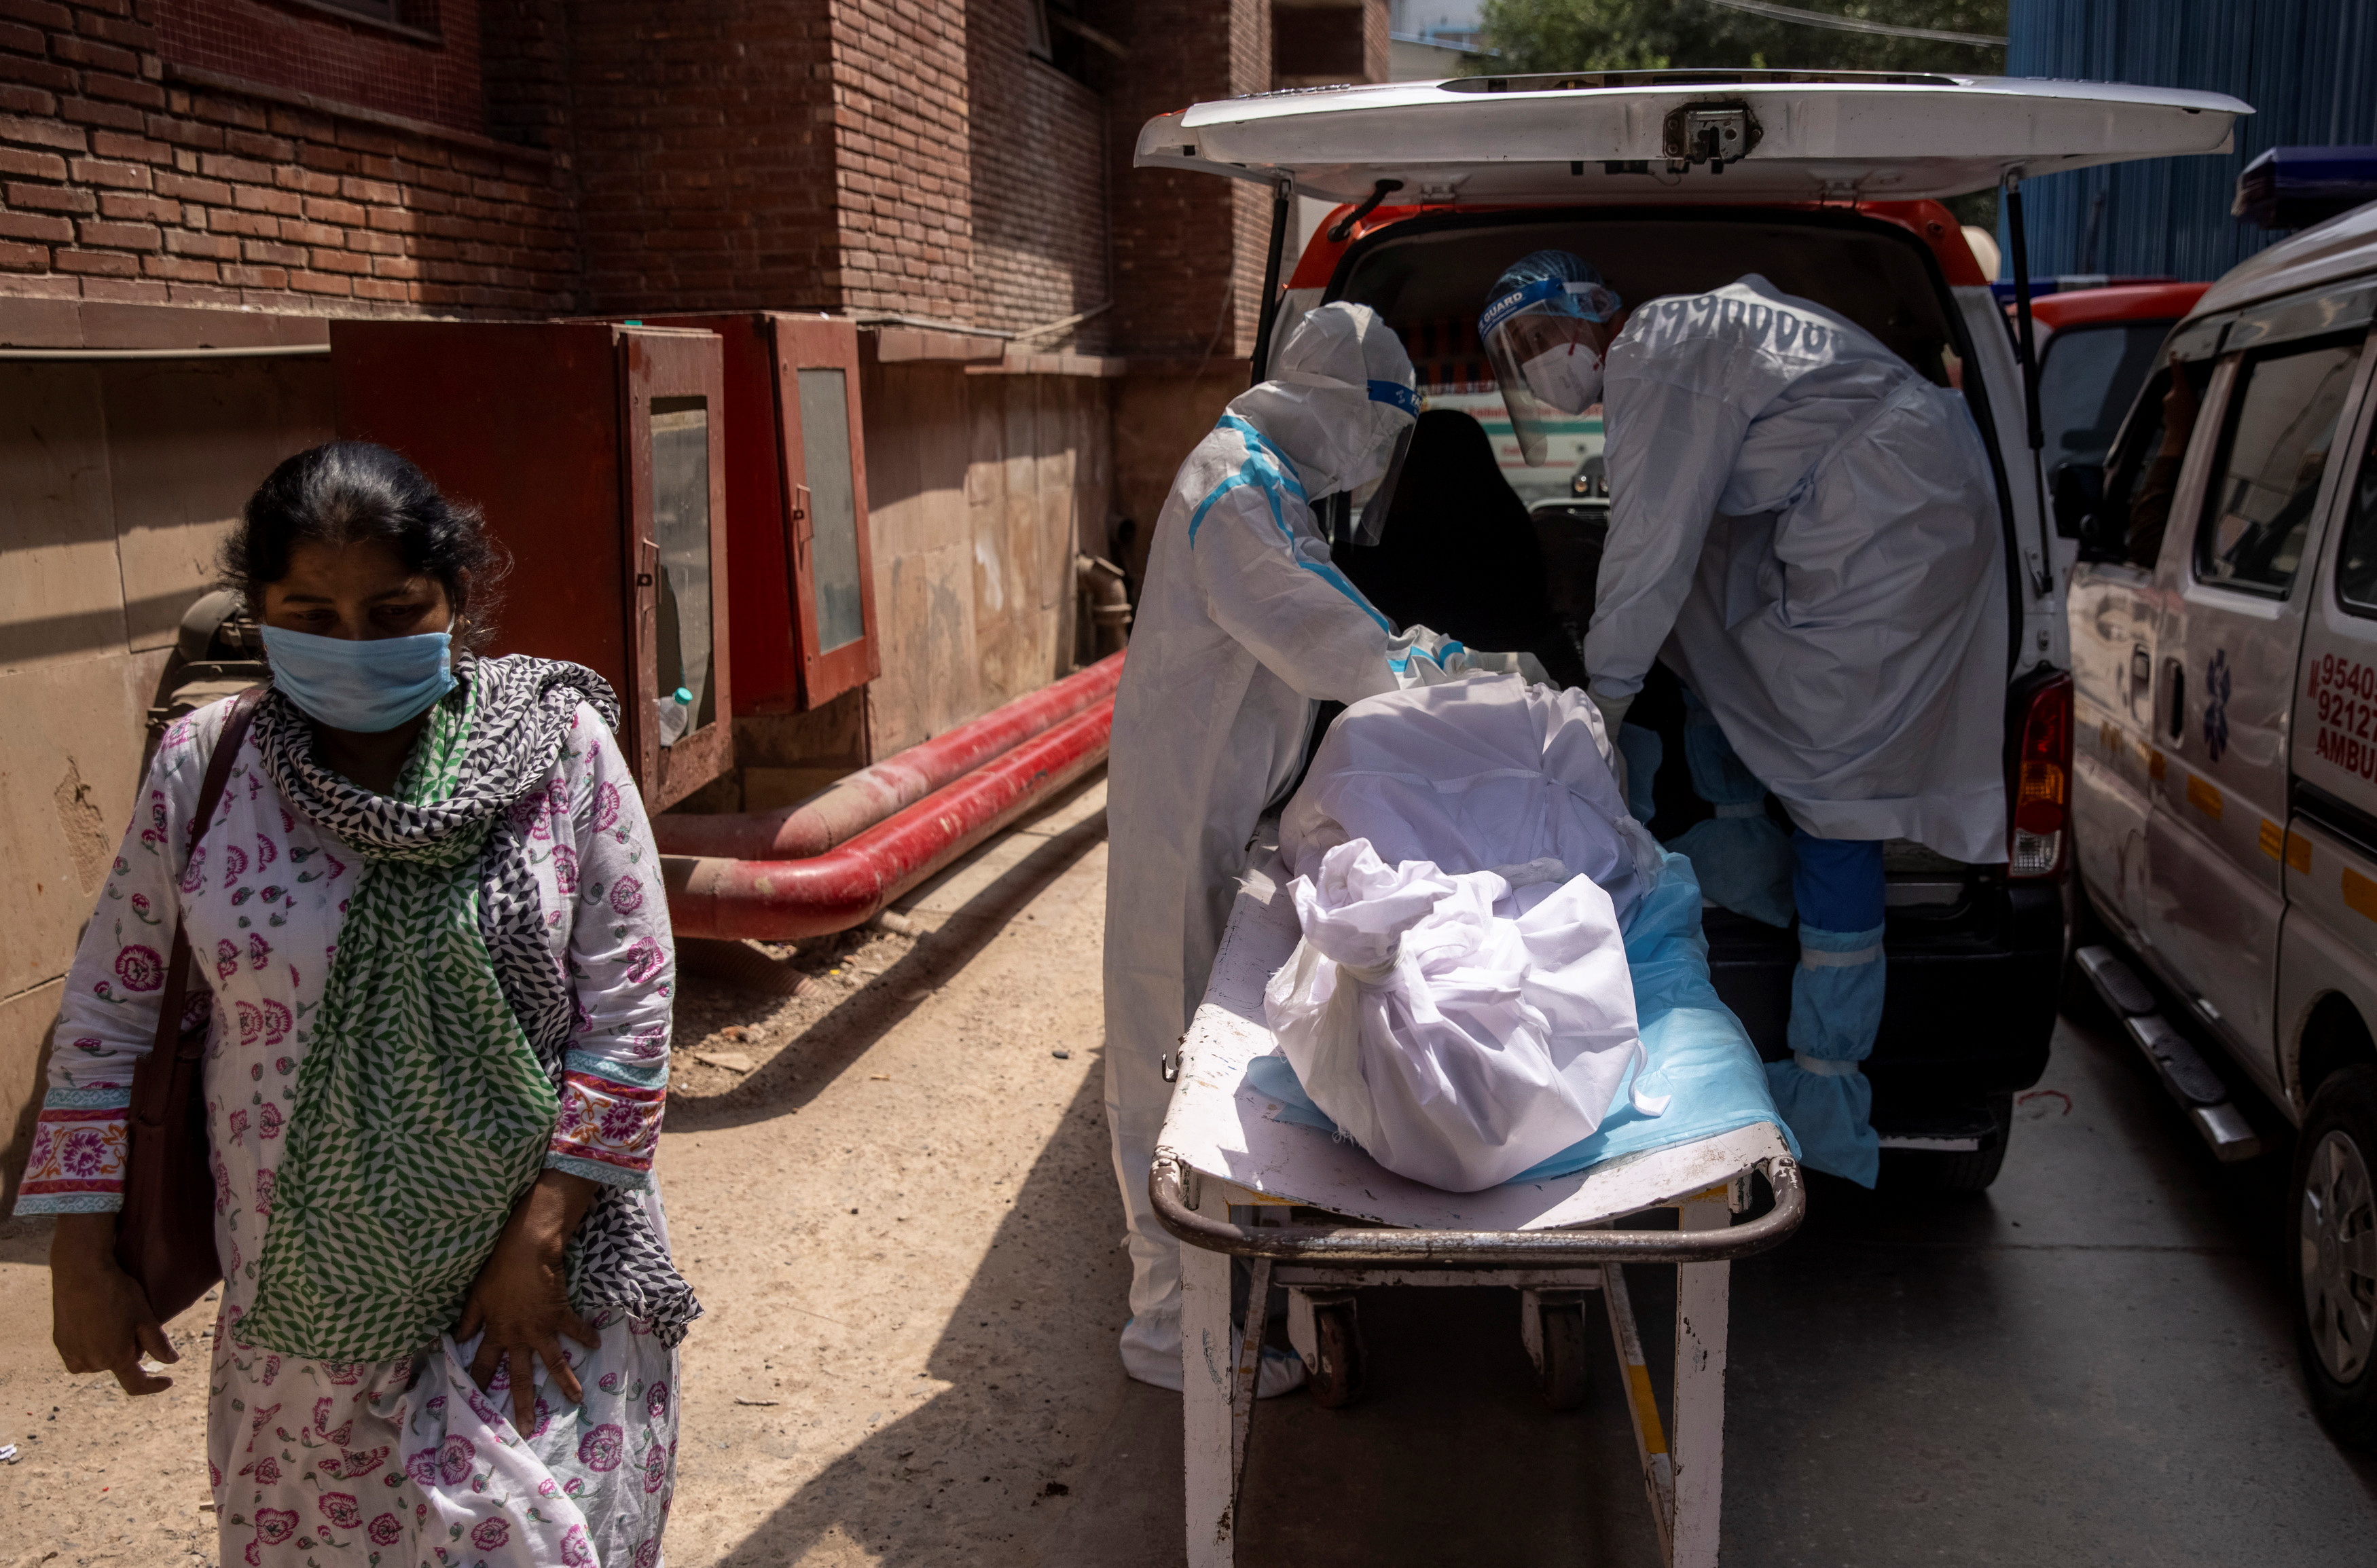 Healthcare workers load the body of a man died from the coronavirus disease (COVID-19) into an ambulance, in Lok Nayak Jai Prakash (LNJP) hospital, amidst the spread of the disease in New Delhi